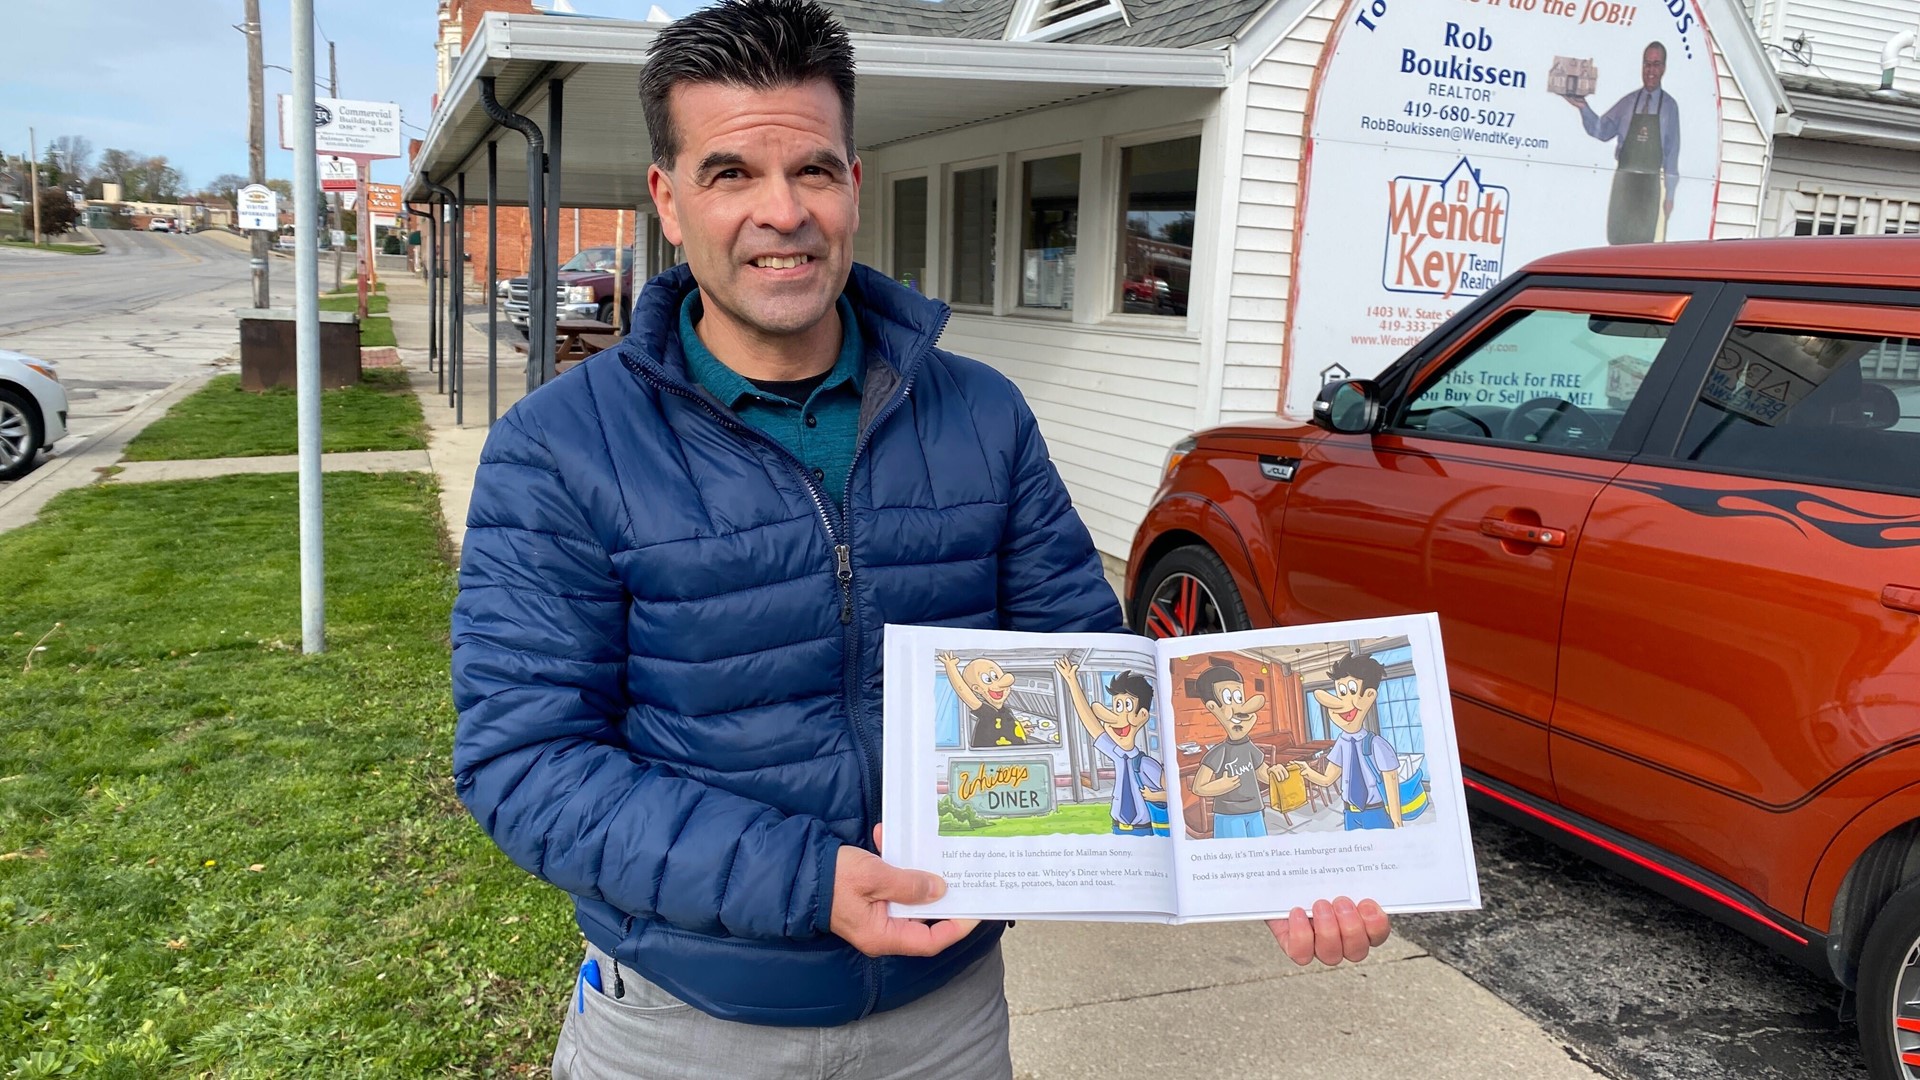 Sonny Workman decided to share his experiences while delivering mail in an illustrated children's book.